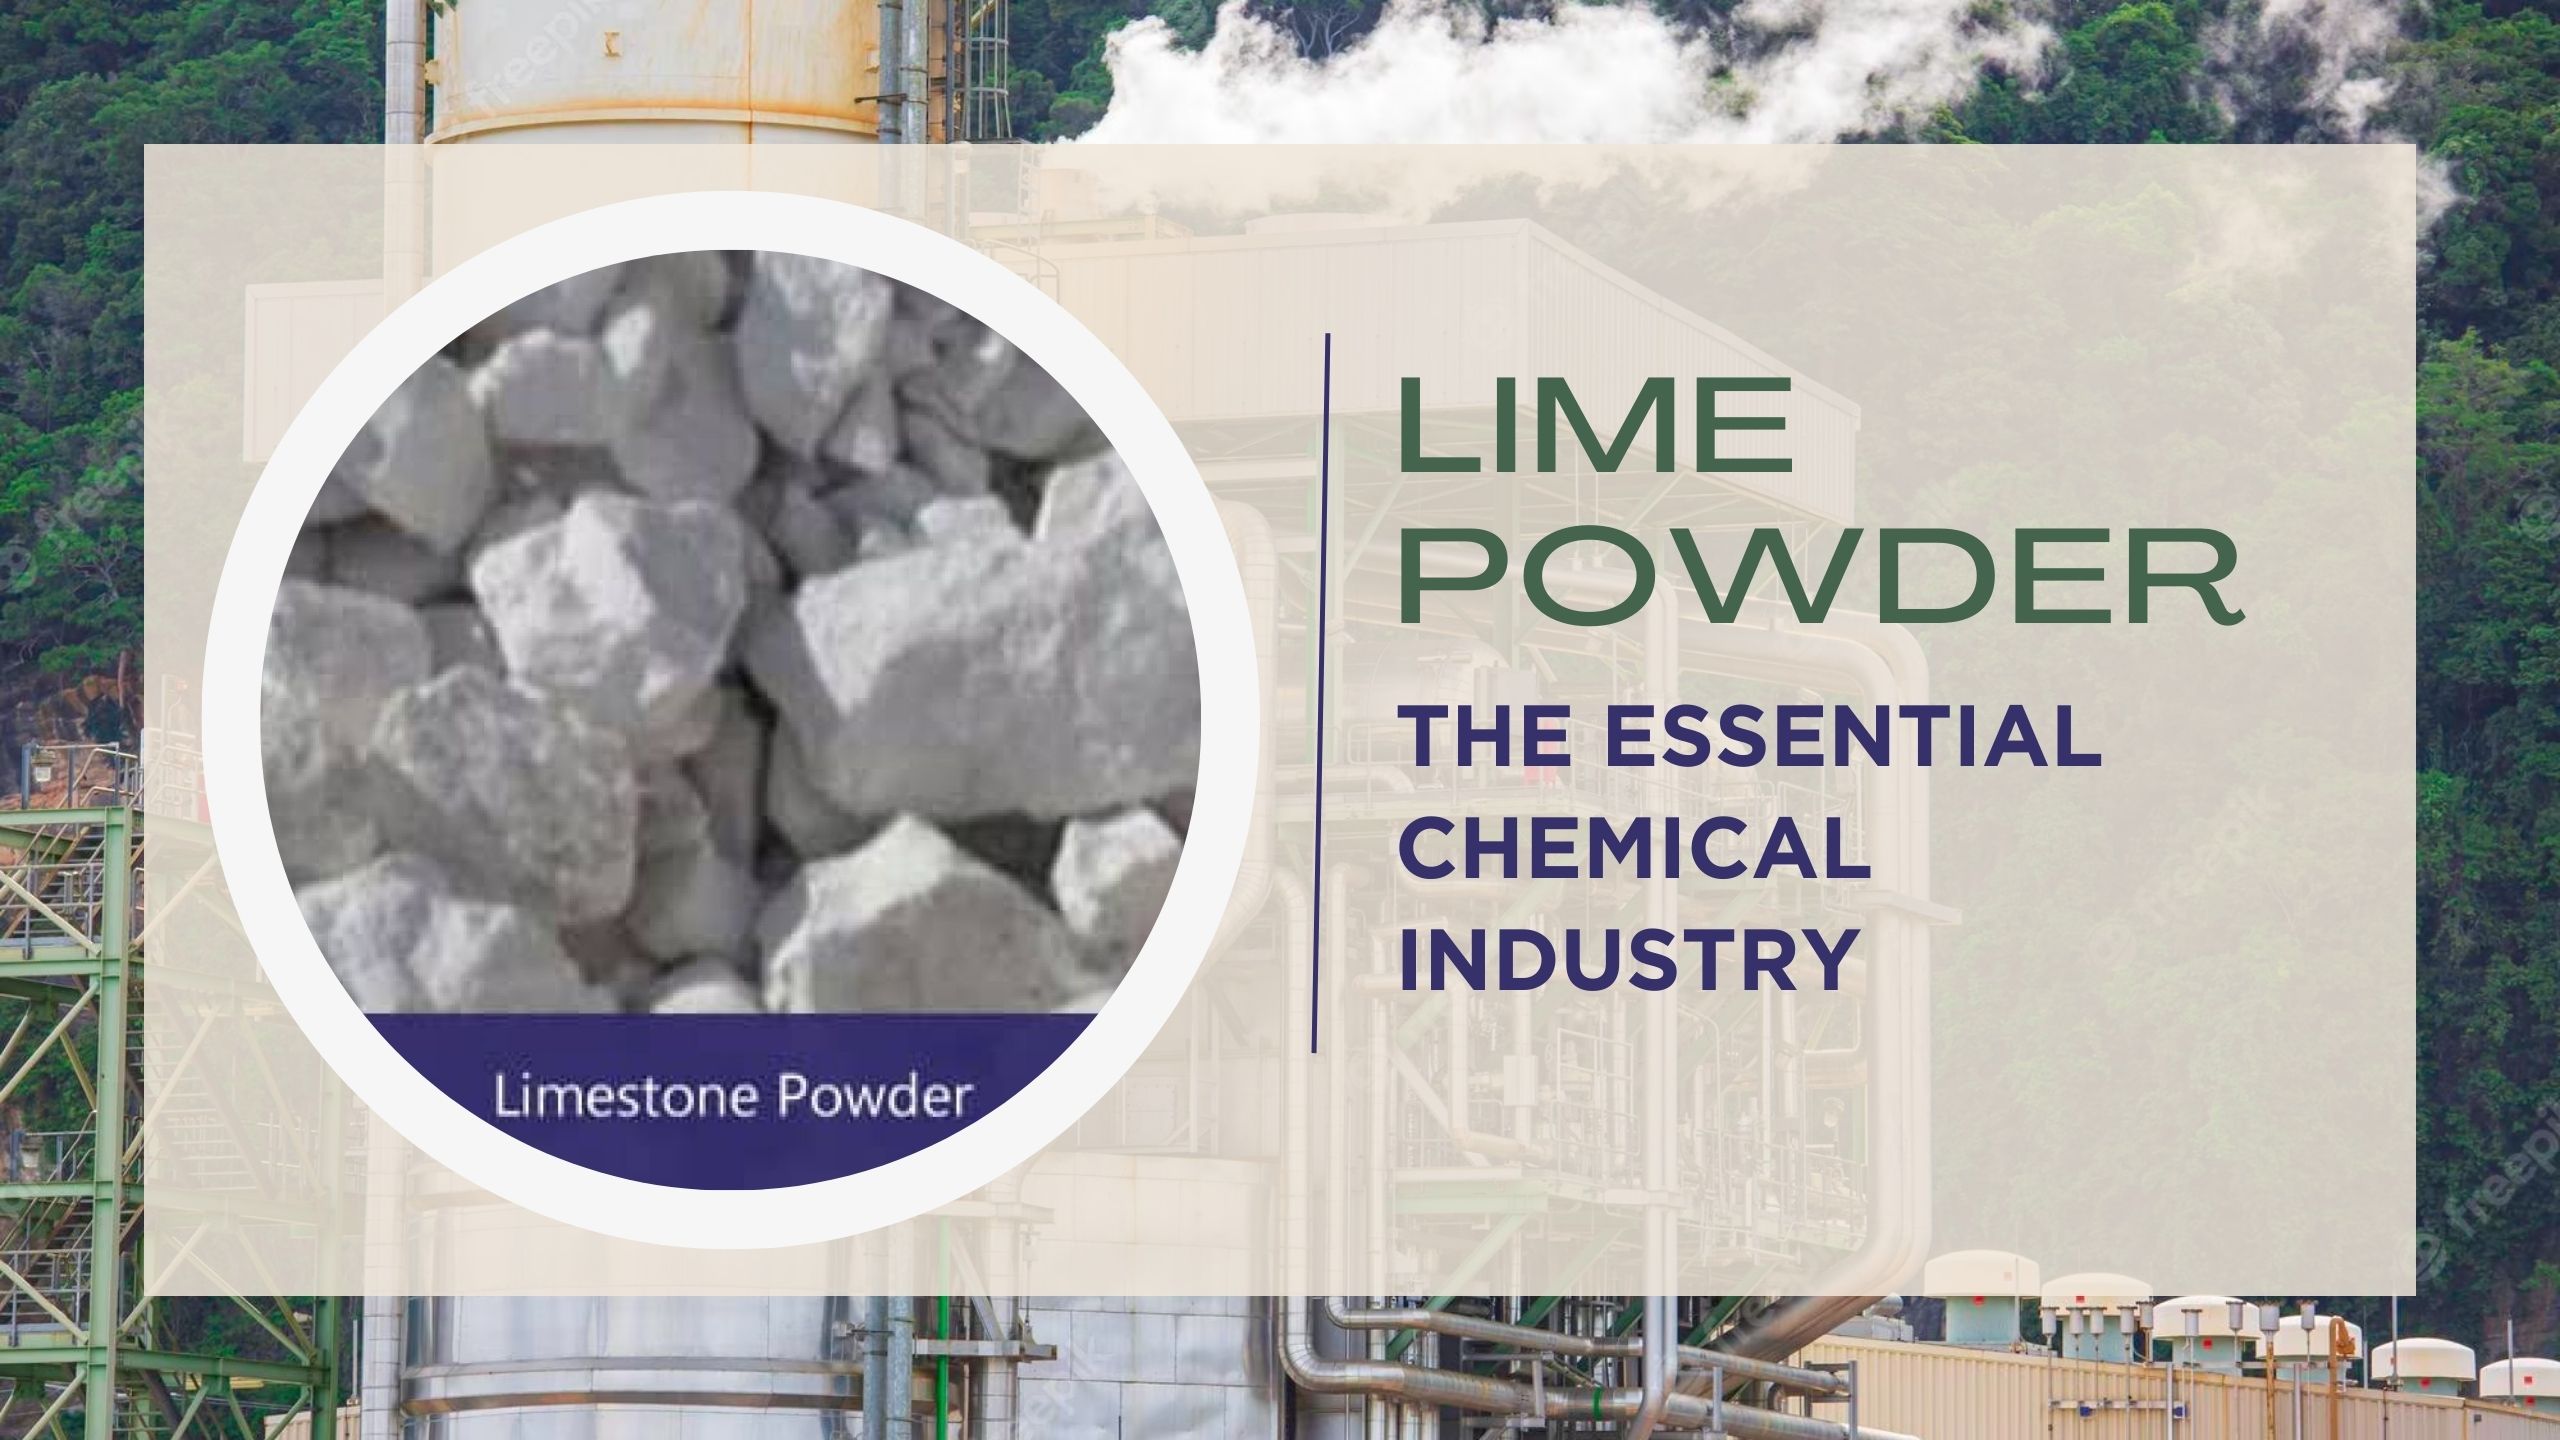 Lime Powder – The Essential Chemical Industry